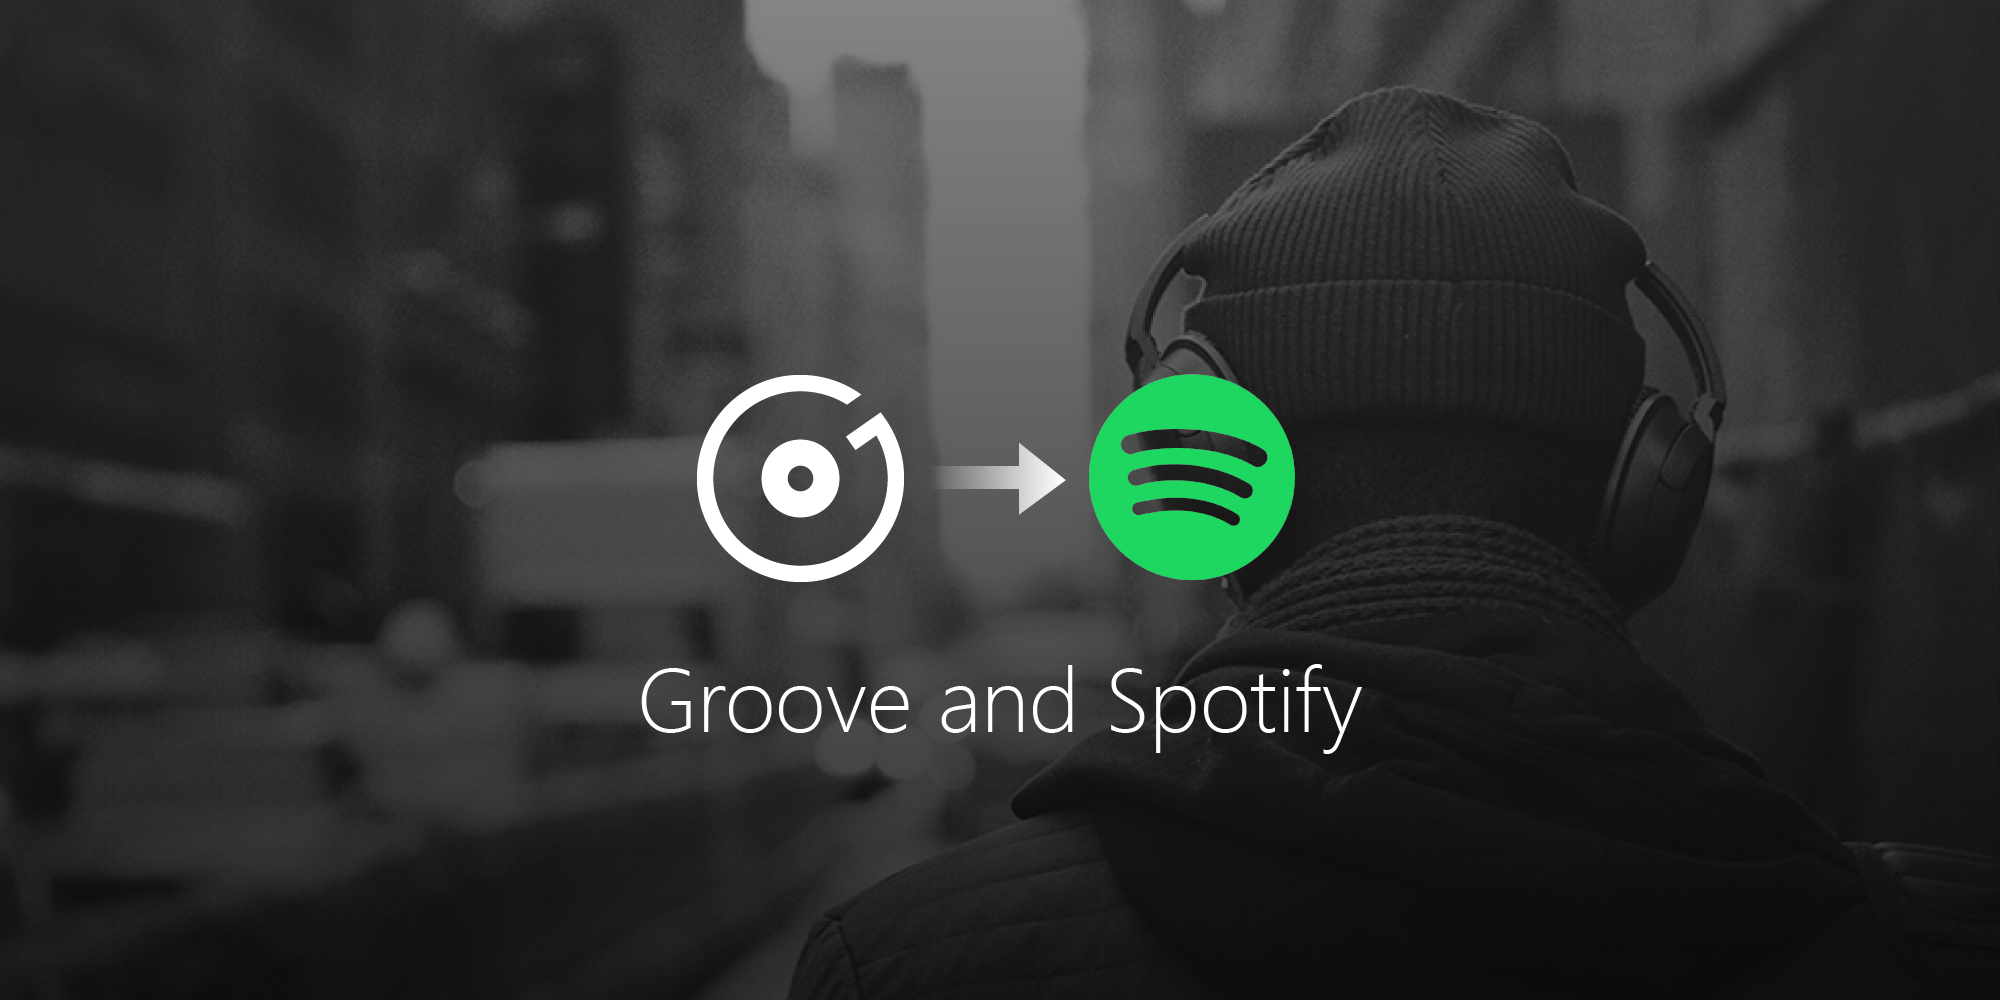 Groove logo with arrow pointing to the right toward the Spotify logo